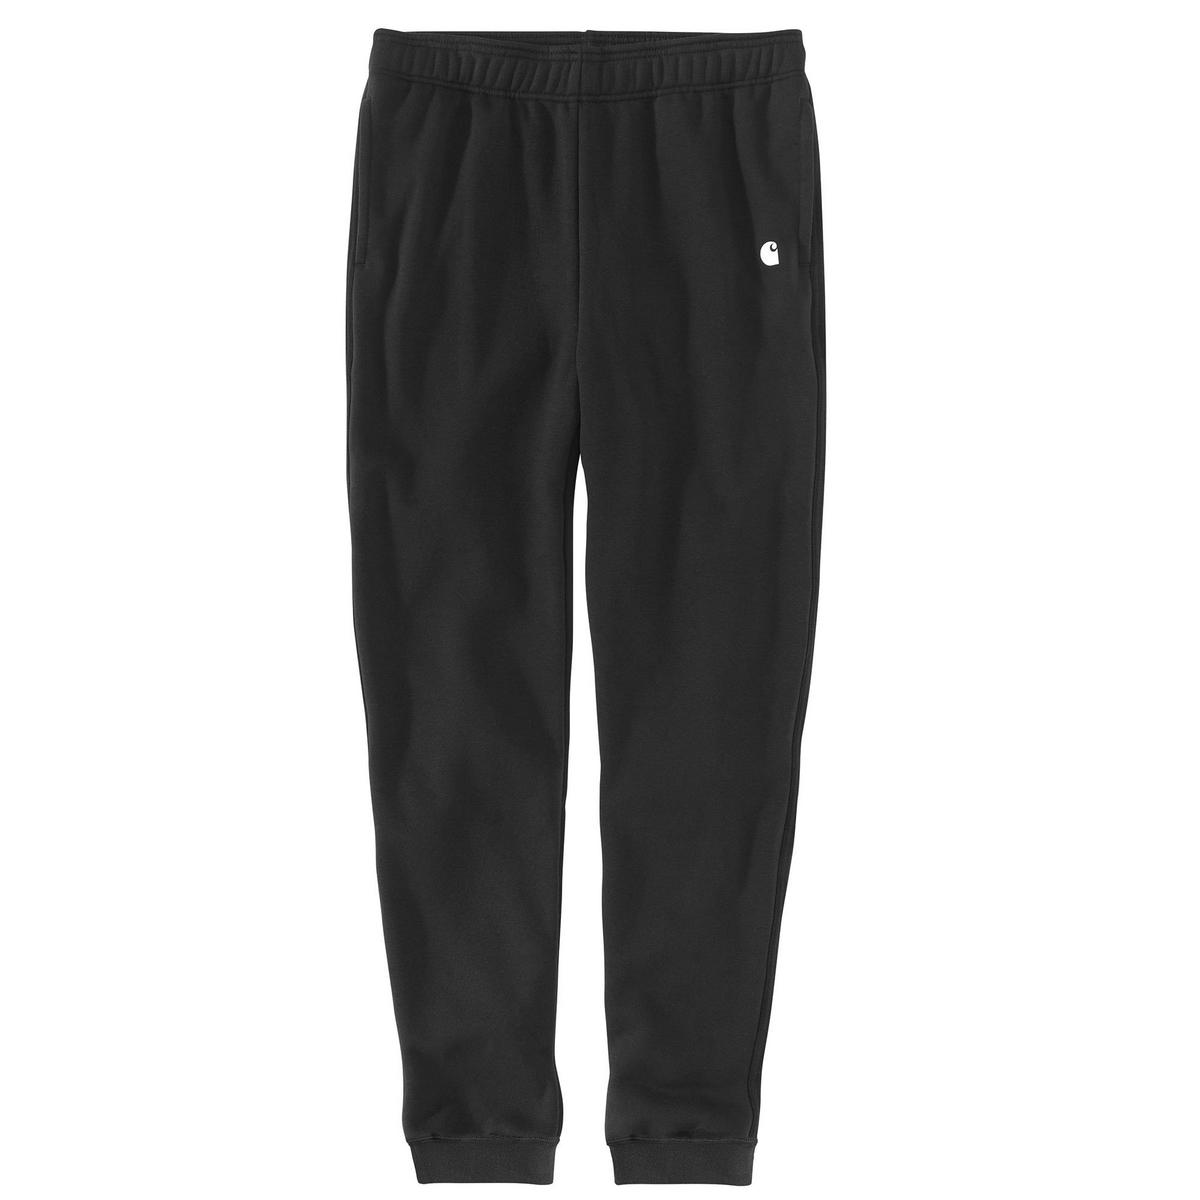 Men's Relaxed Fit Midweight Tapered Sweatpant